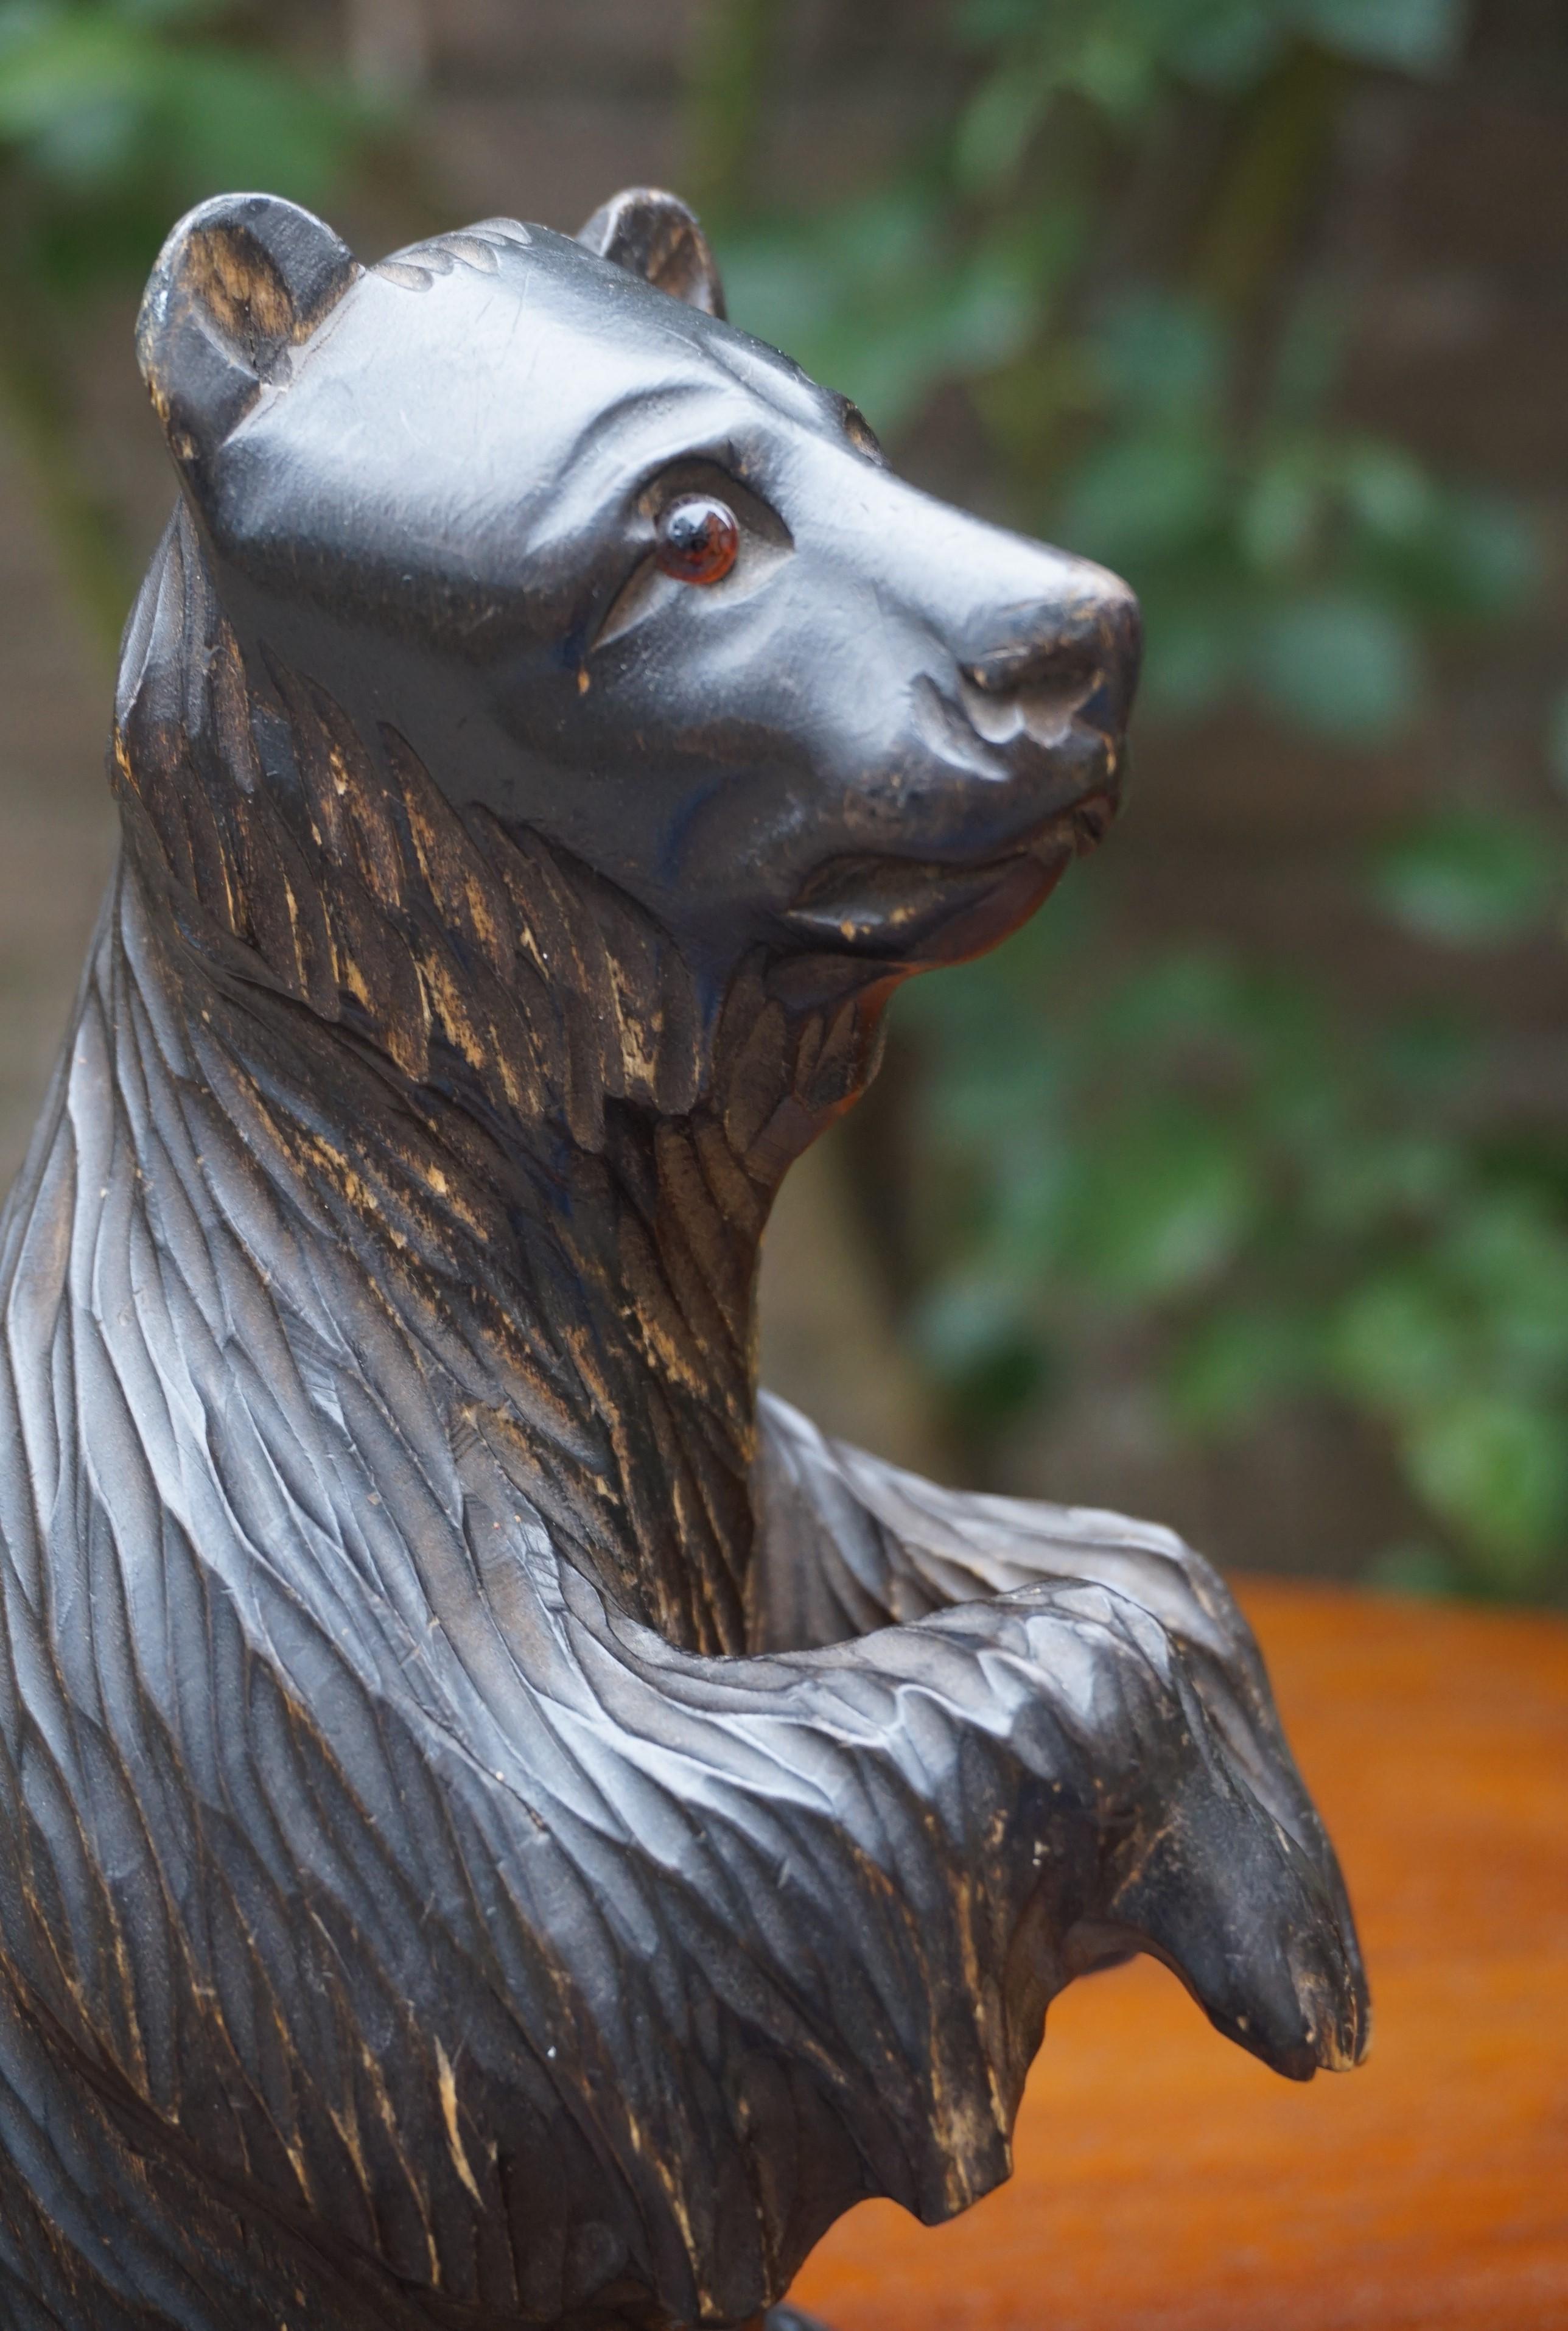 One of a kind, sitting bear sculpture with colored glass eyes and lots of character.

This early to mid-20th century sitting bear sculpture from Russia (see image 13 & 14) has the most beautiful facial expression and it takes a true artisan to be